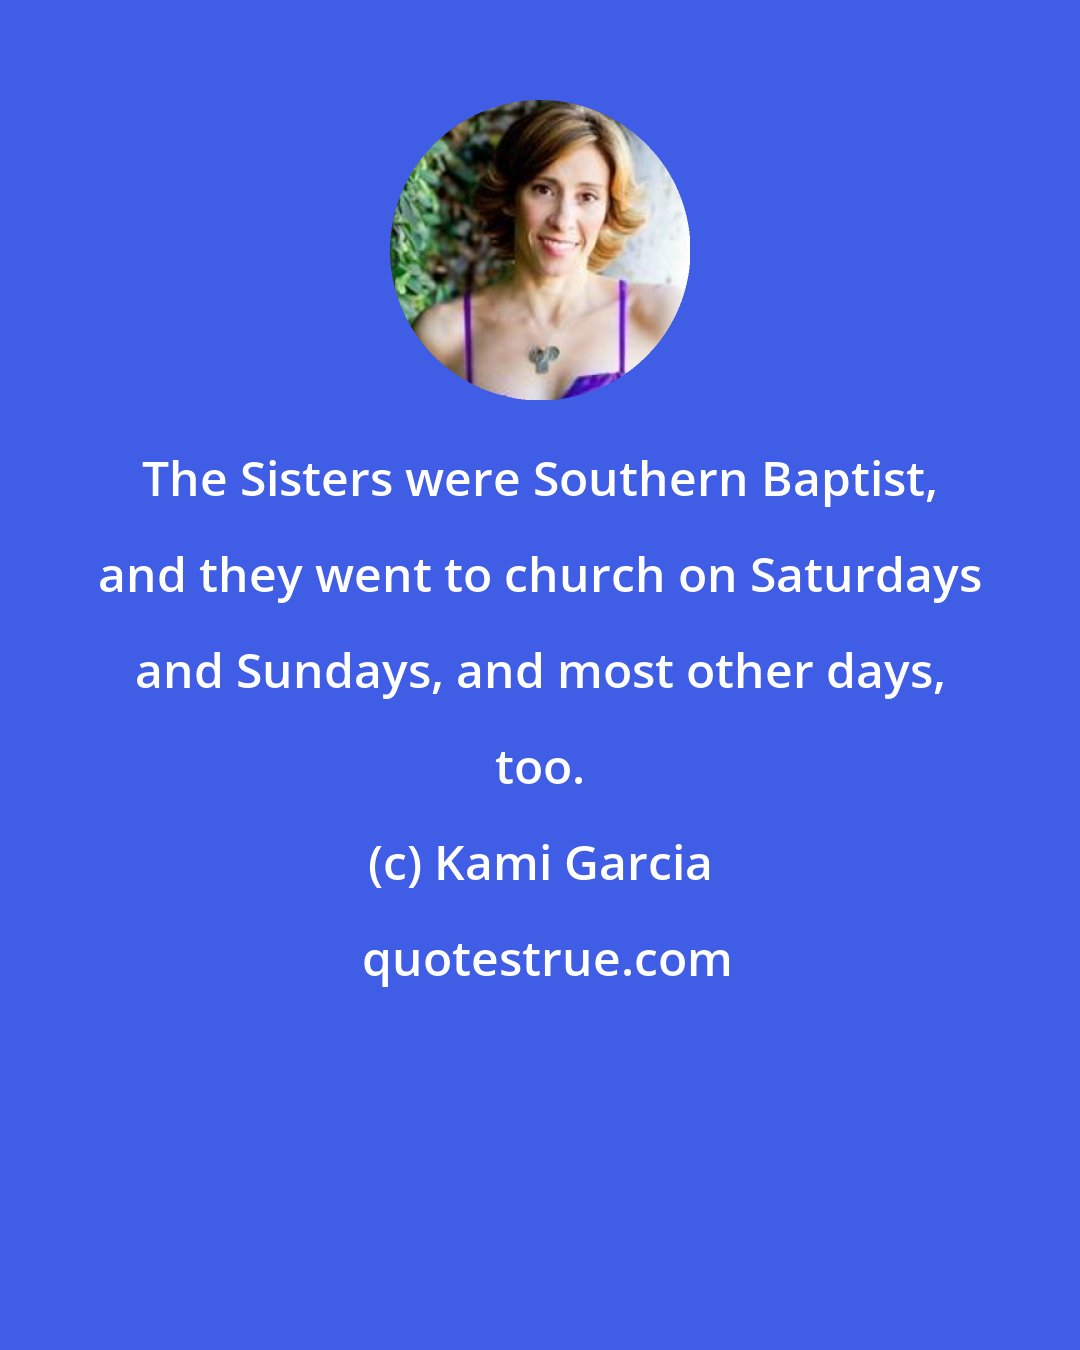 Kami Garcia: The Sisters were Southern Baptist, and they went to church on Saturdays and Sundays, and most other days, too.